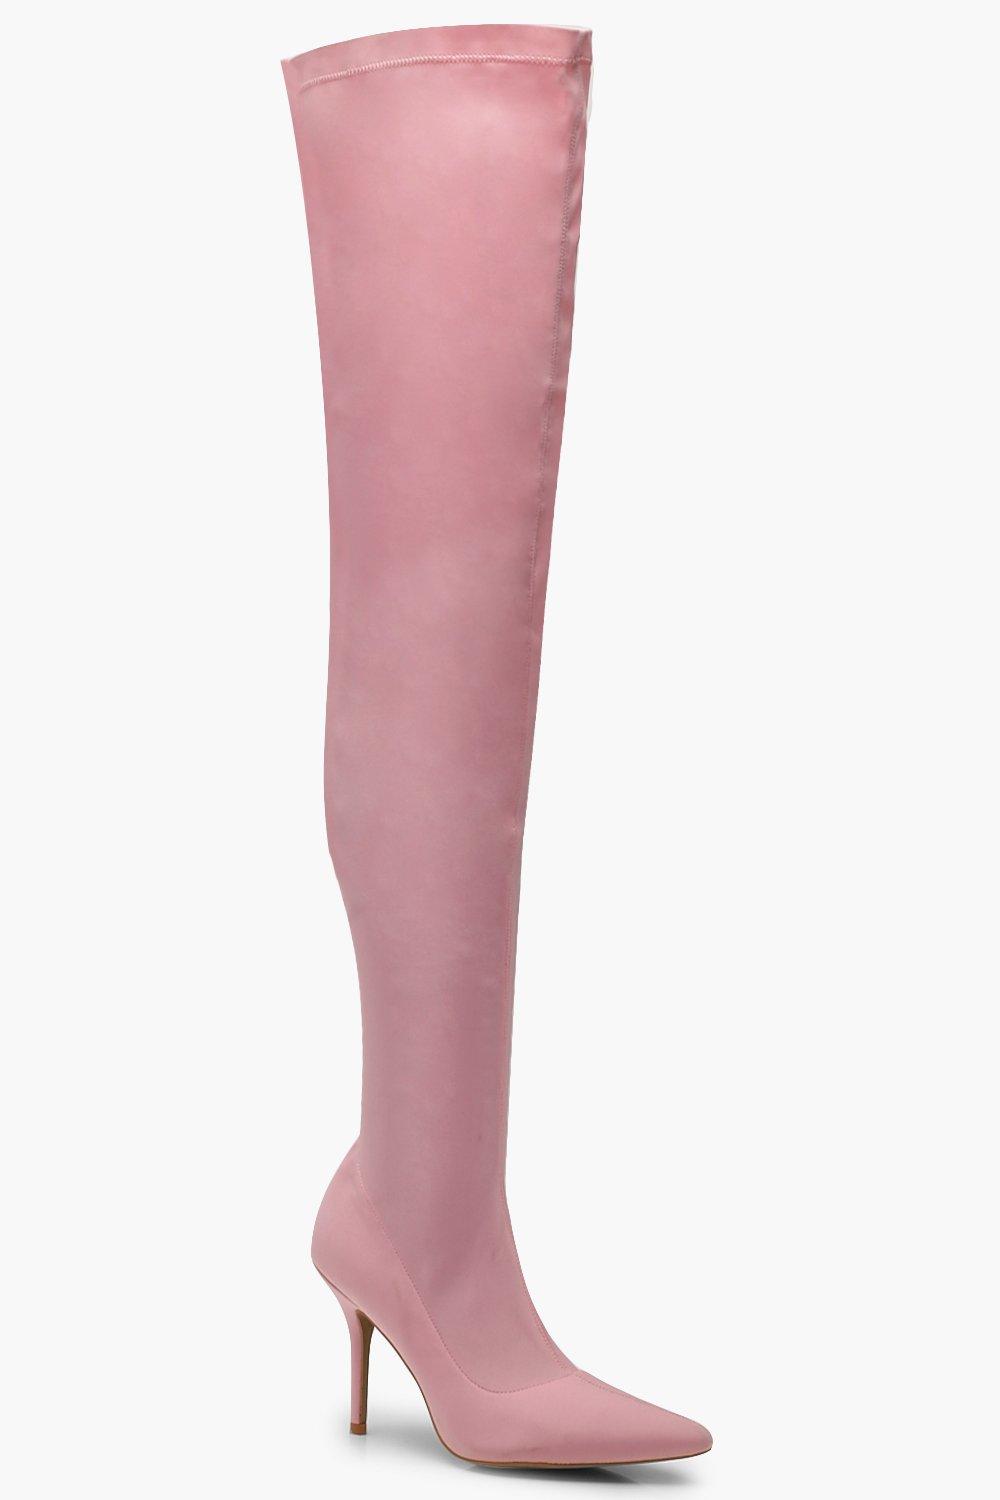 pink knee high boots uk